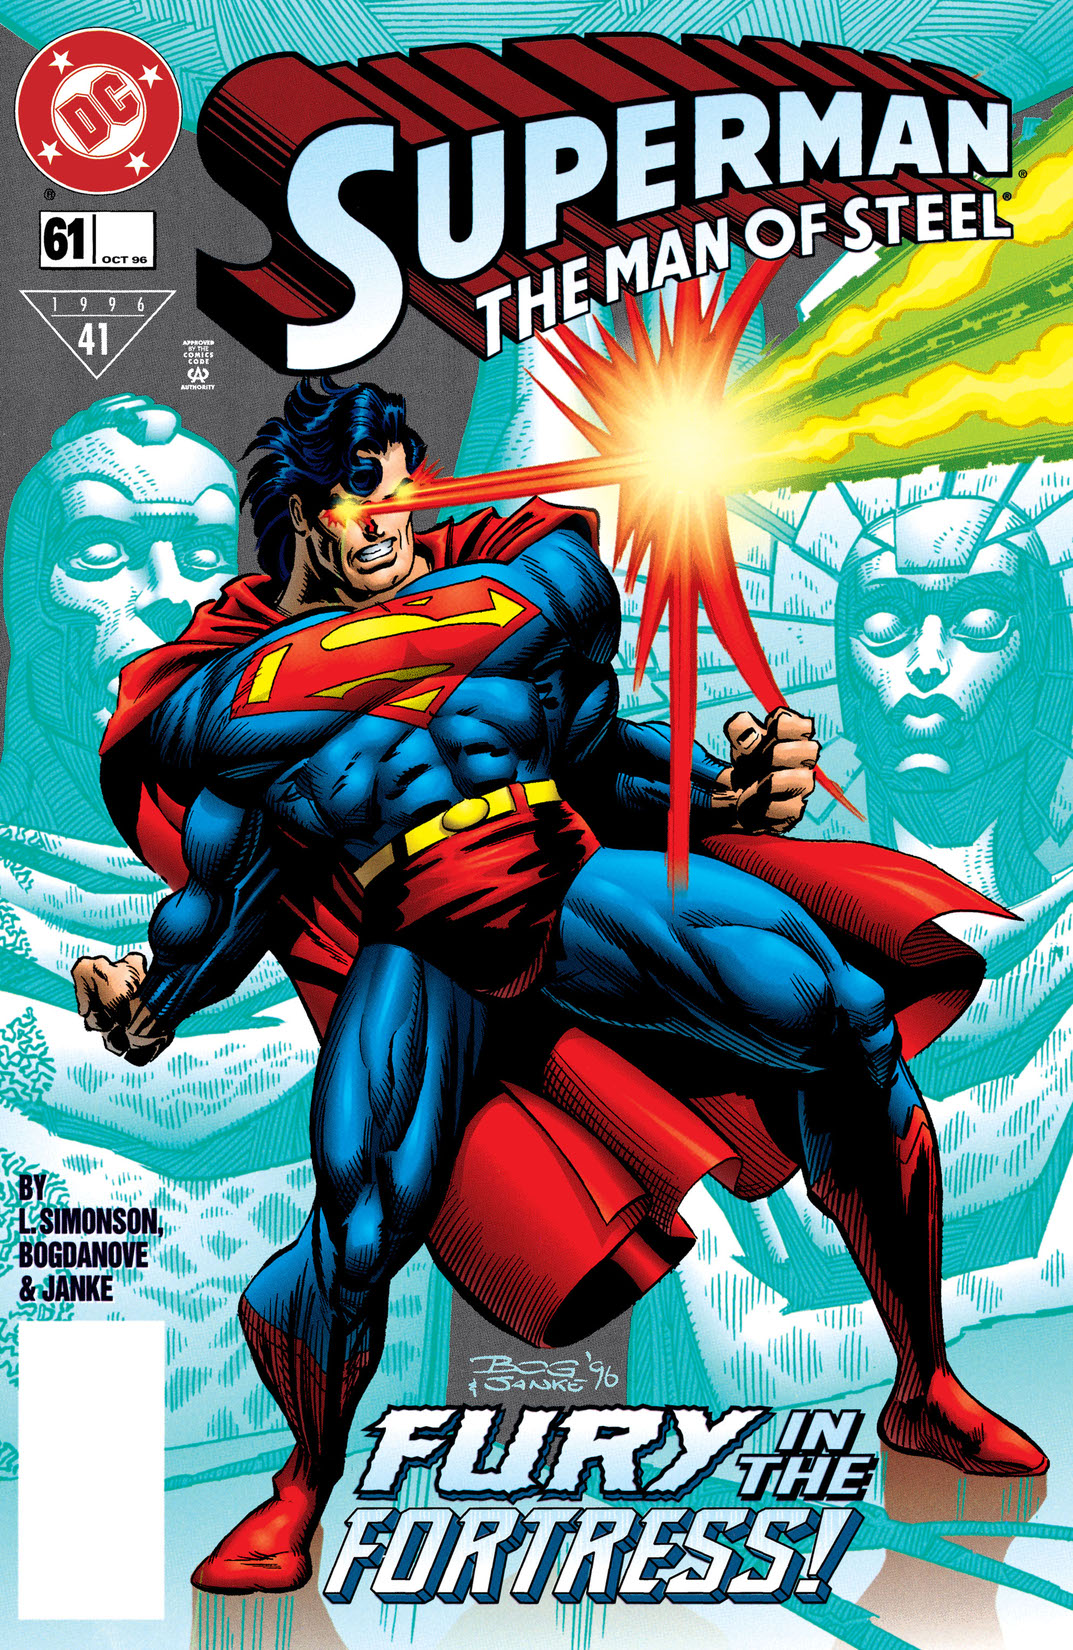 Superman: The Man of Steel #61 preview images